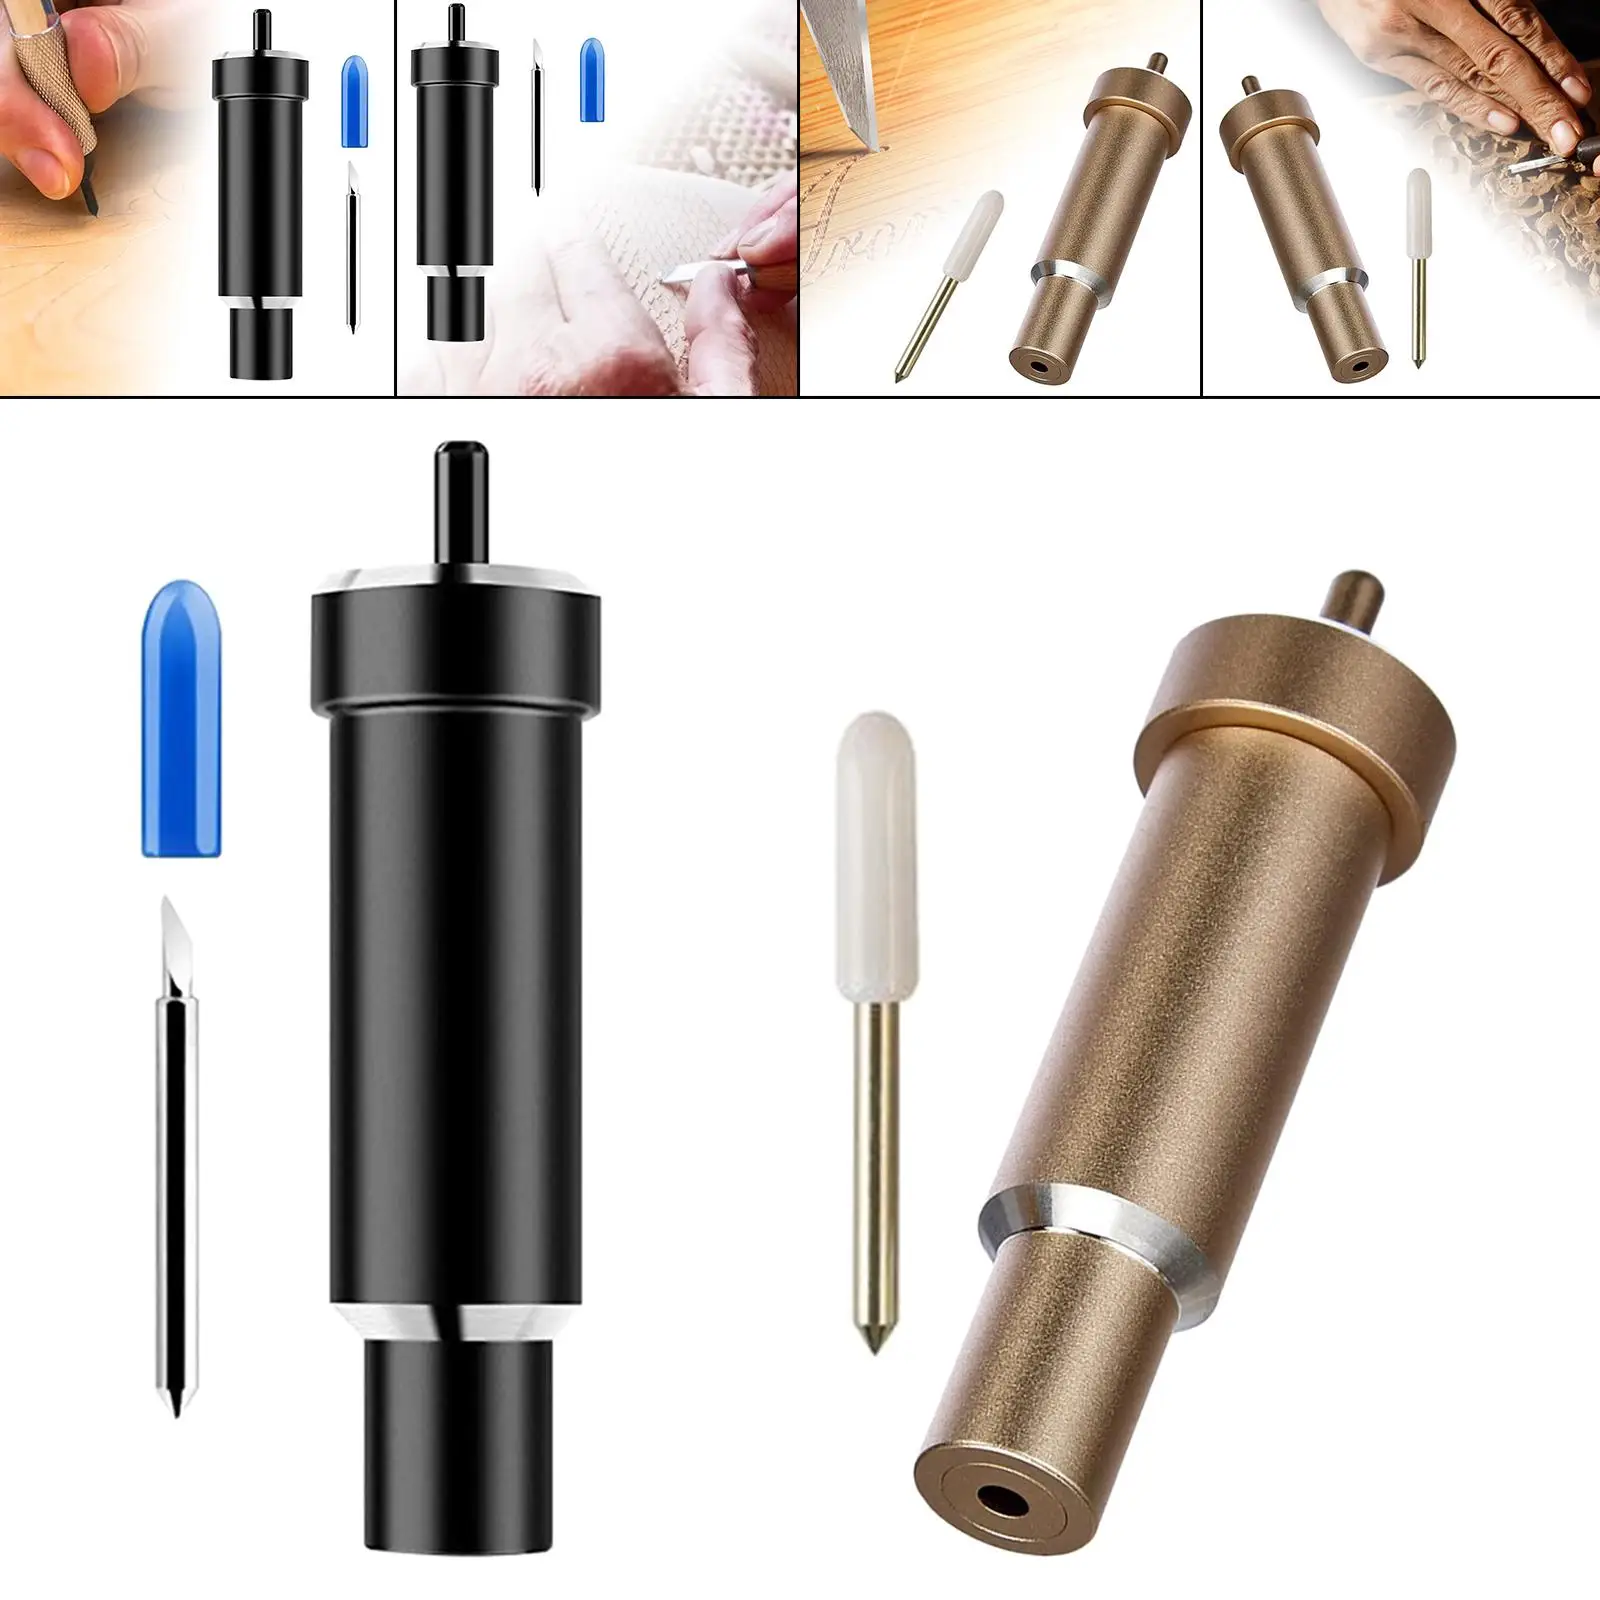 Engraving Tip and Housing Engraving Tool Professional Engraver Accessories